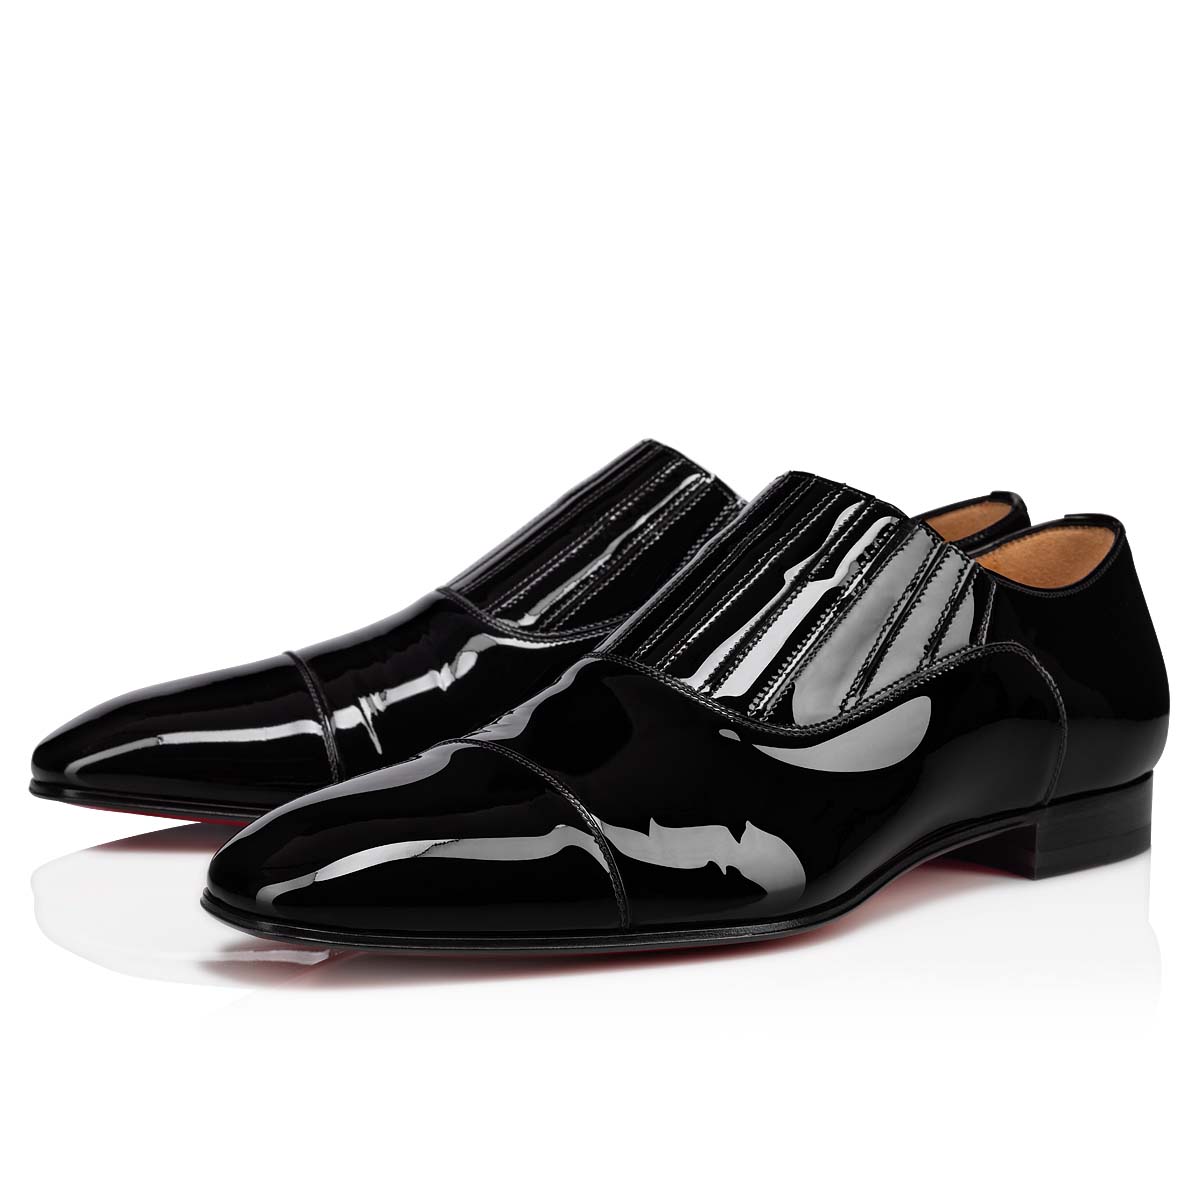 Greg On - Lace-up shoes Patent calf - Black - Christian Louboutin